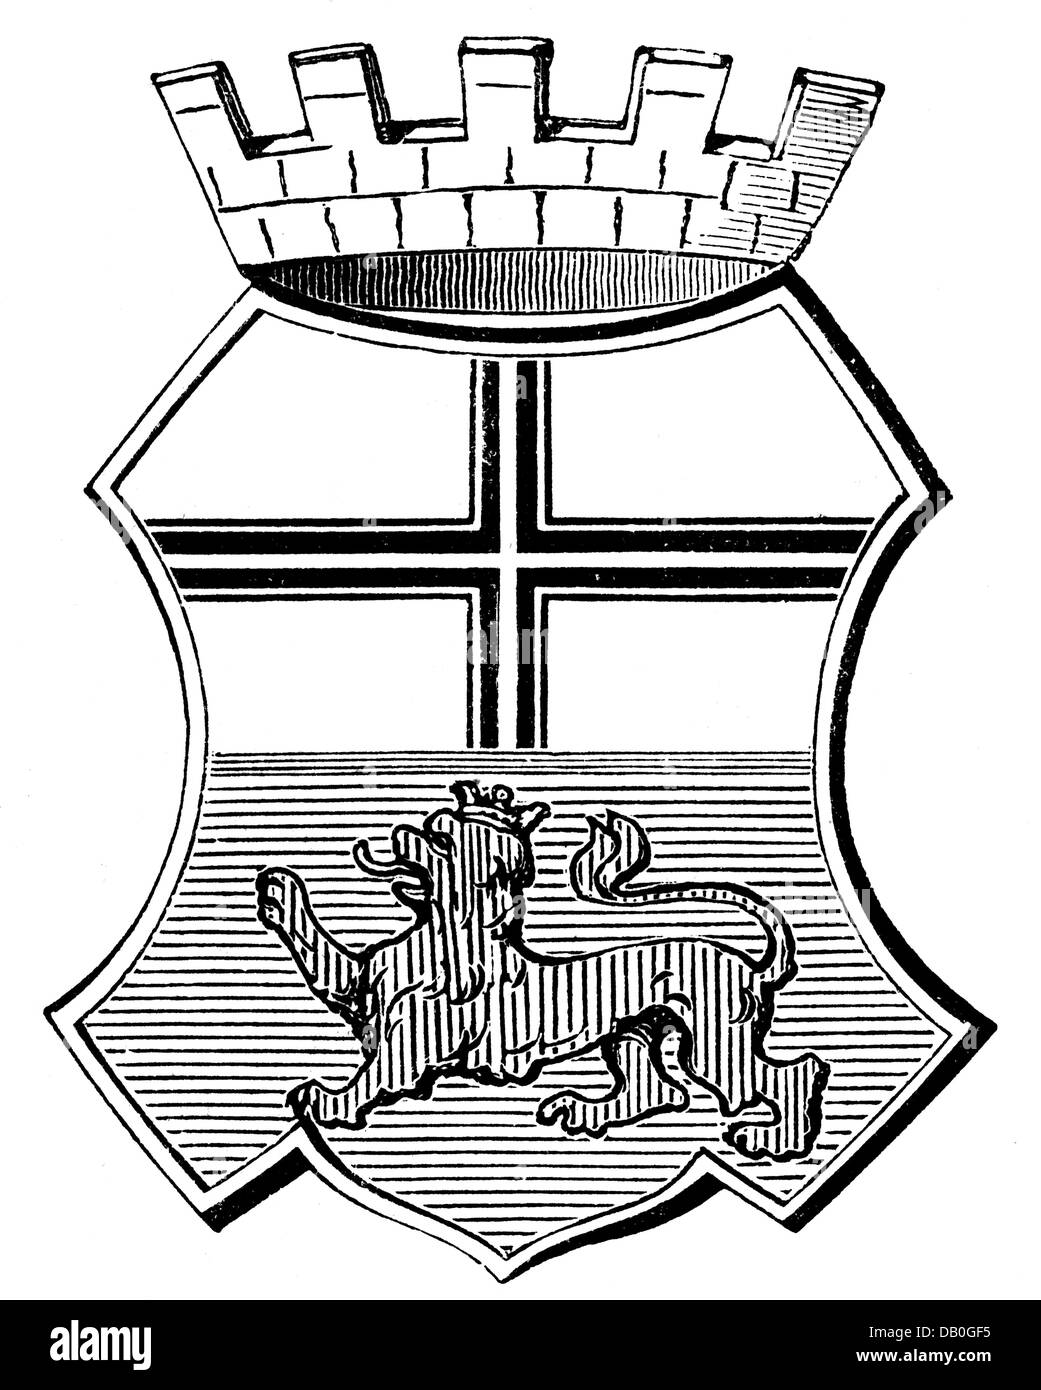 heraldry, coat of arms, Germany, city arms, Bonn, wood engraving, late 19th century latin cross, lion, North Rhine-Westphalia, North Rhine - Westphalia, Kingdom of Prussia, Rhine Province, German Empire, Imperial Era, Central Europe, historic, historical, Additional-Rights-Clearences-Not Available Stock Photo